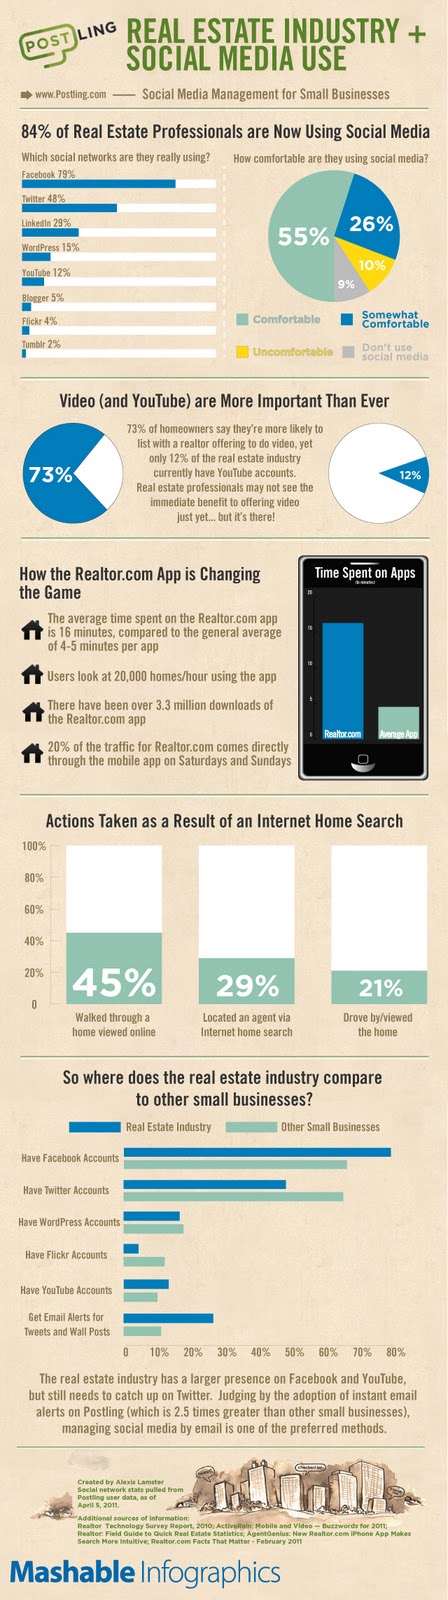 an infographic for real estate and social media use